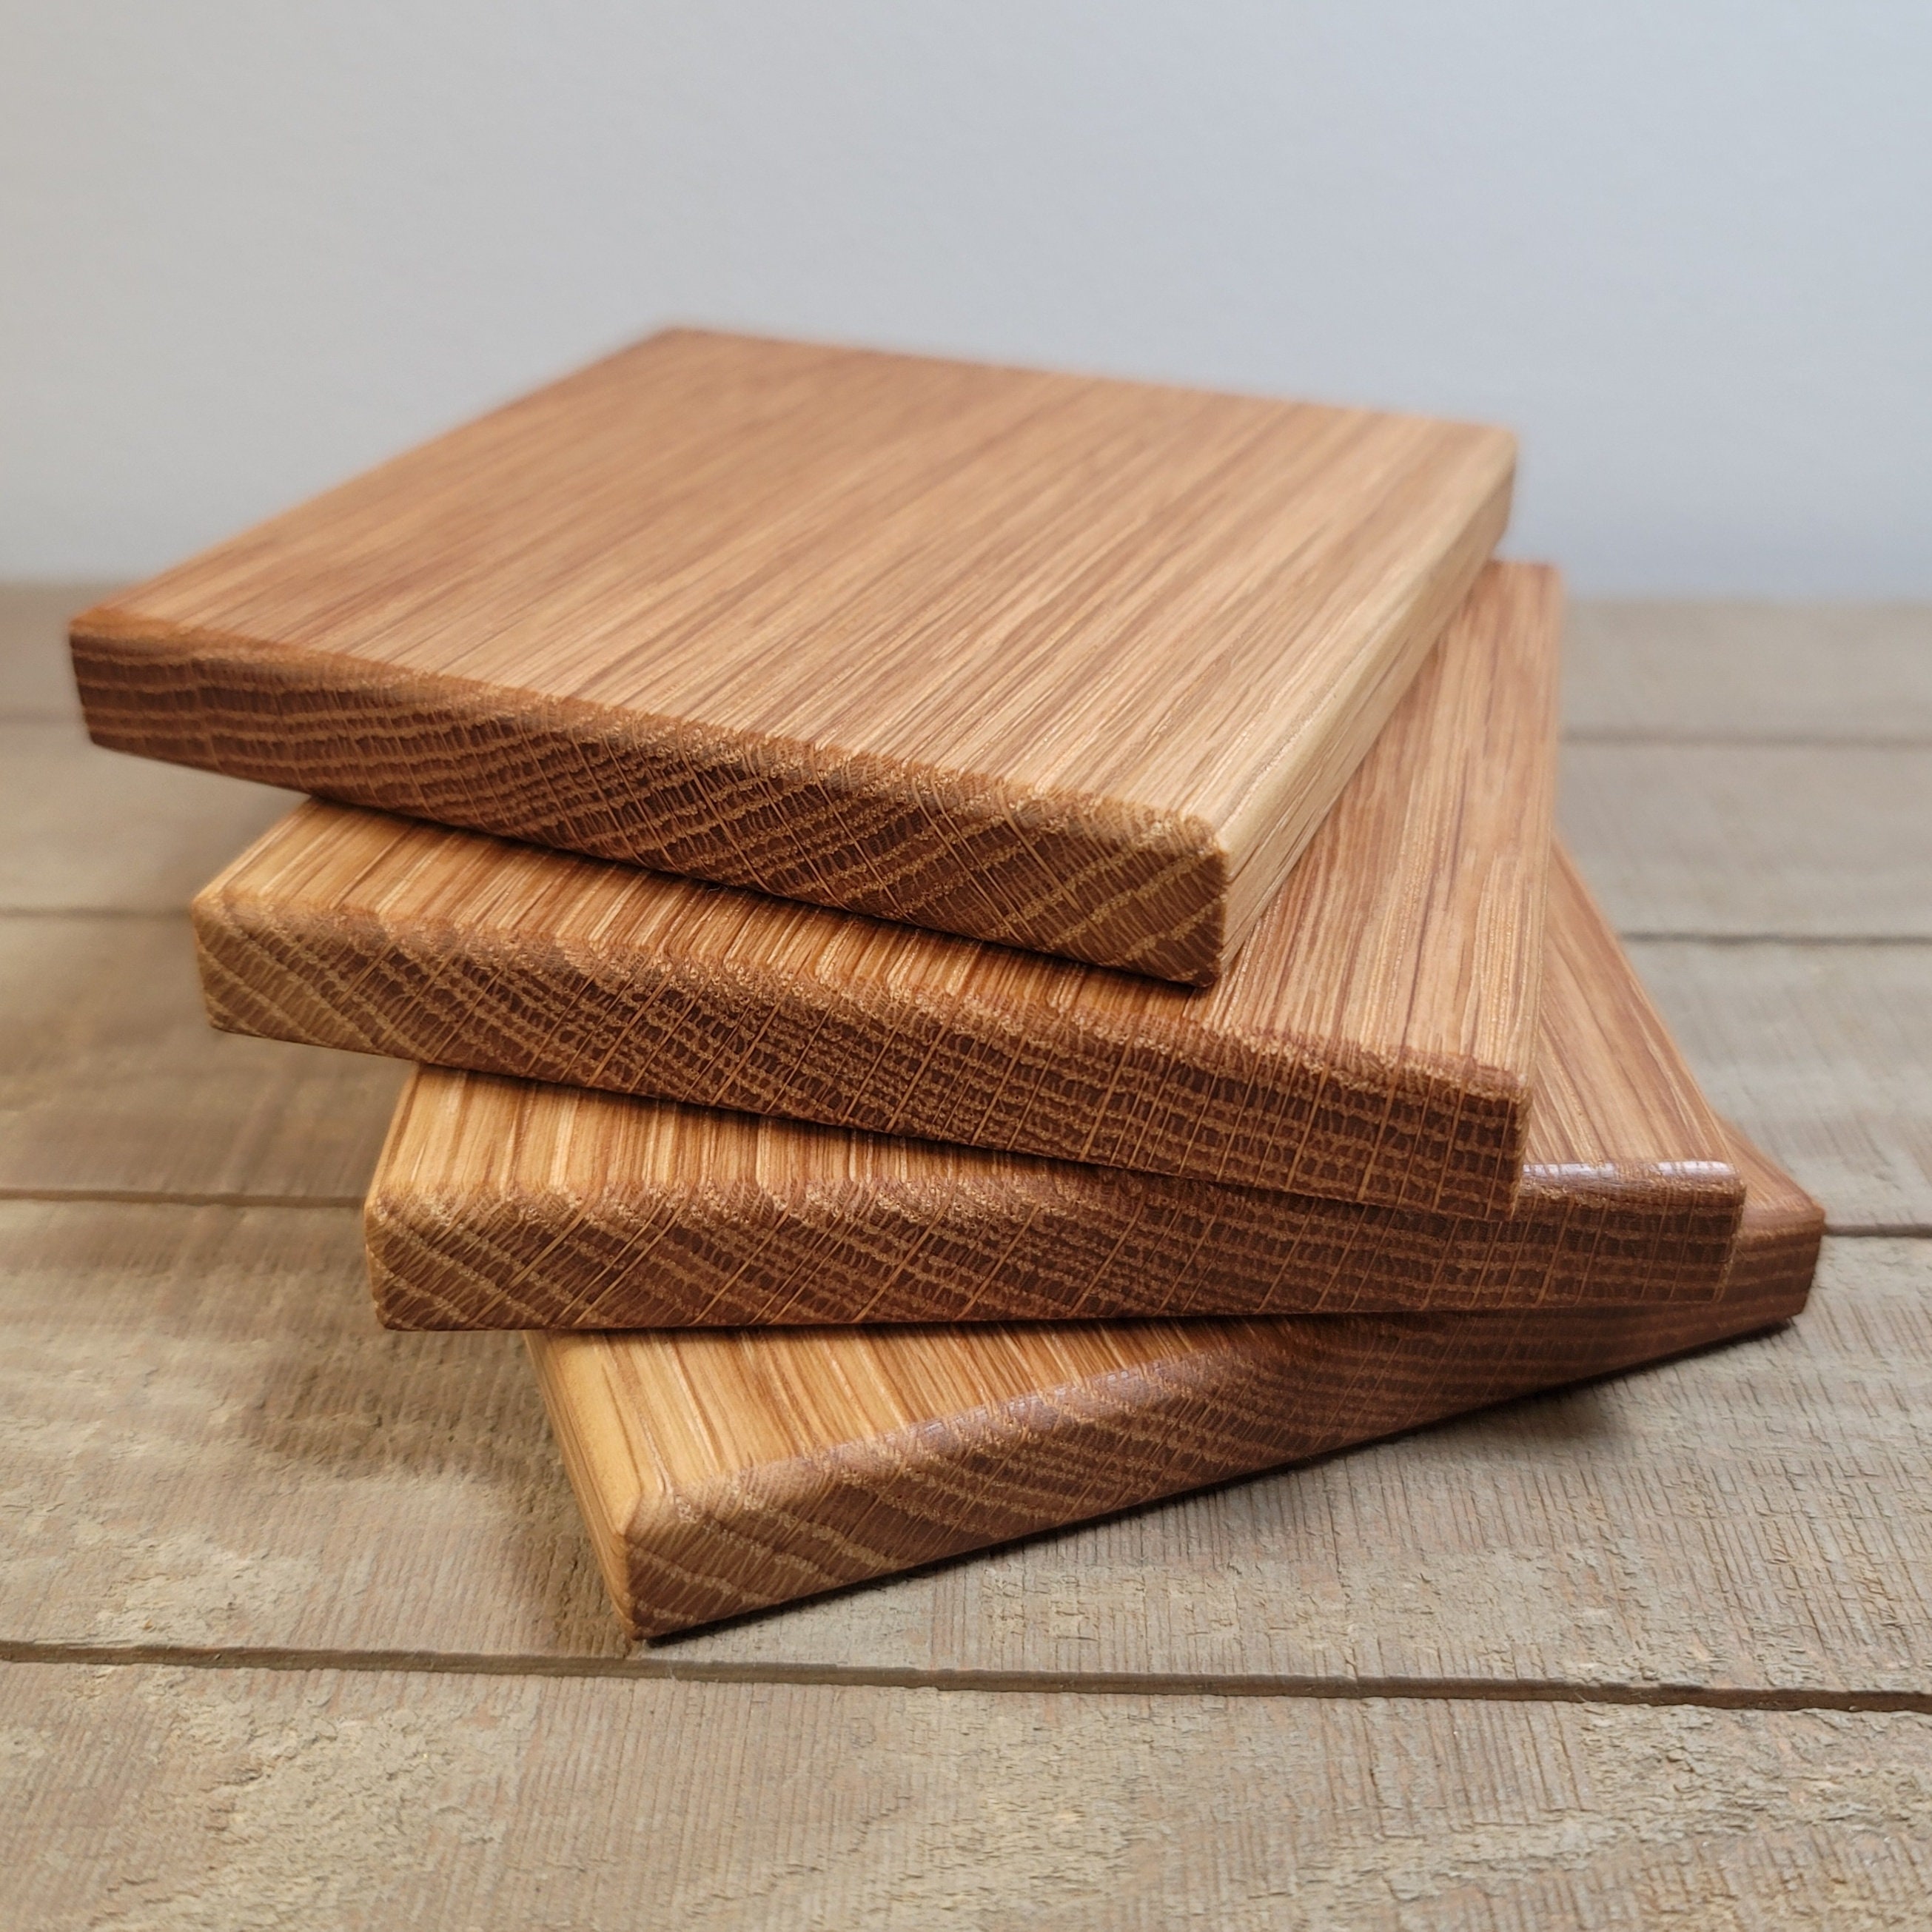 Rare Red Oak Natural Tree Wood Coasters with Bark  Wood coasters, Natural  wood coasters, Red oak wood